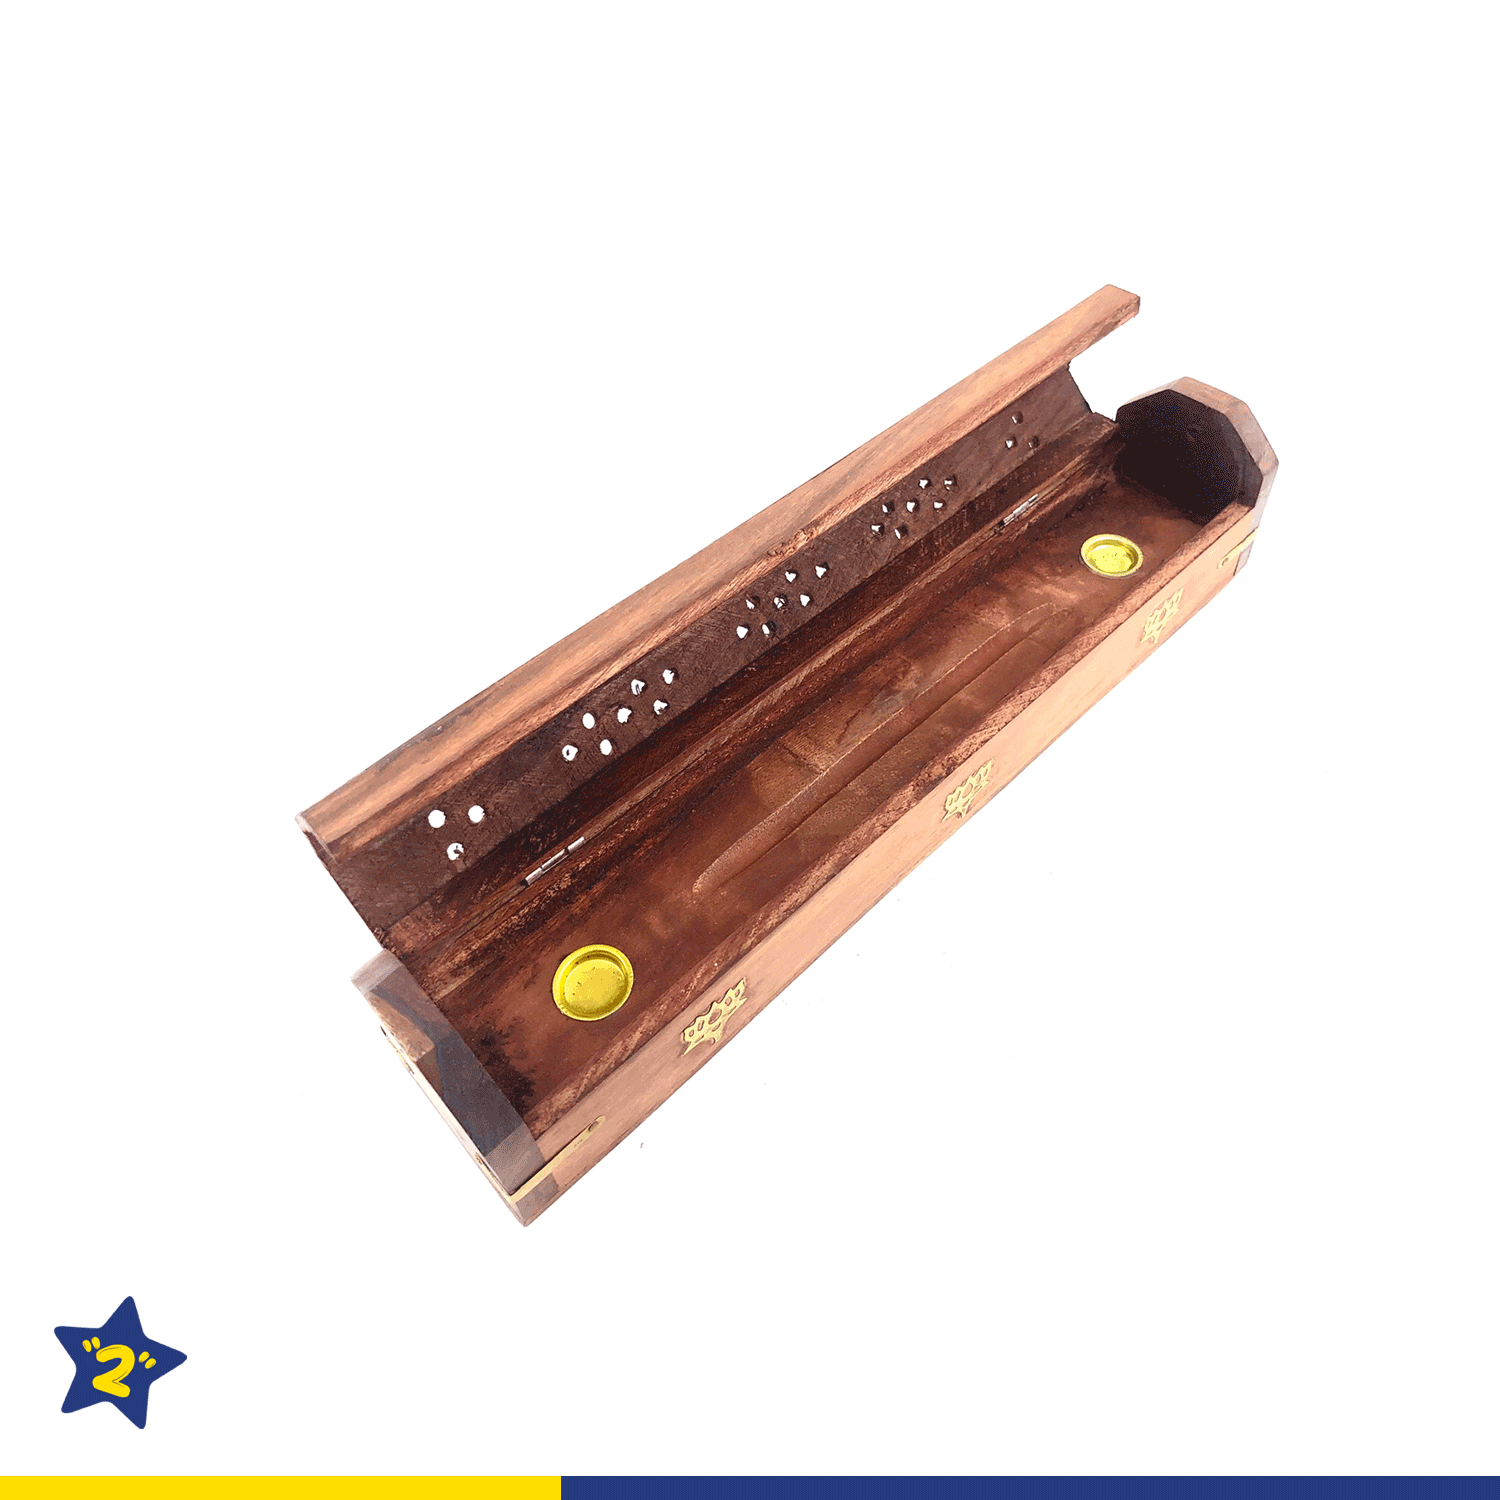 Ppure Wooden Coffin Box Incense Stick Holder